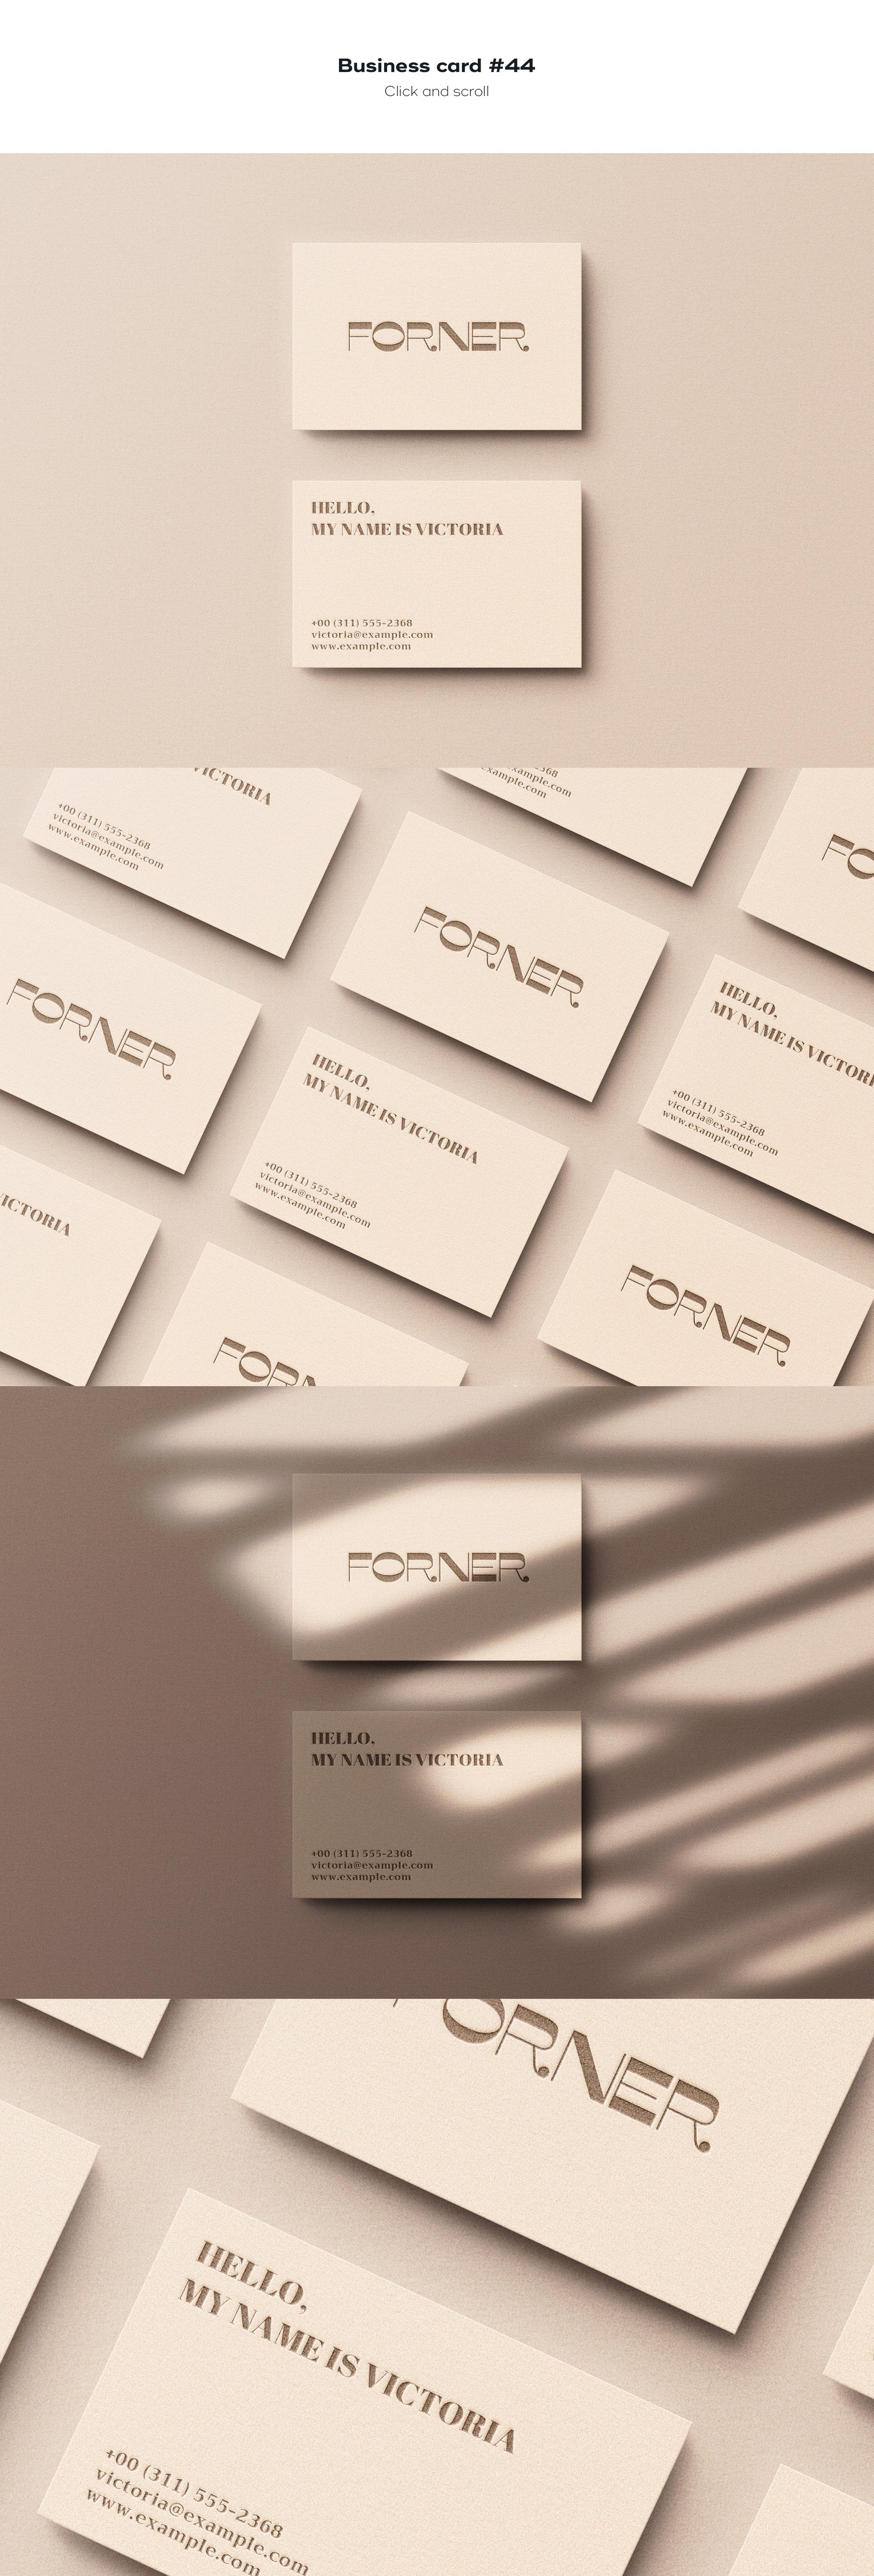 business card 44 936